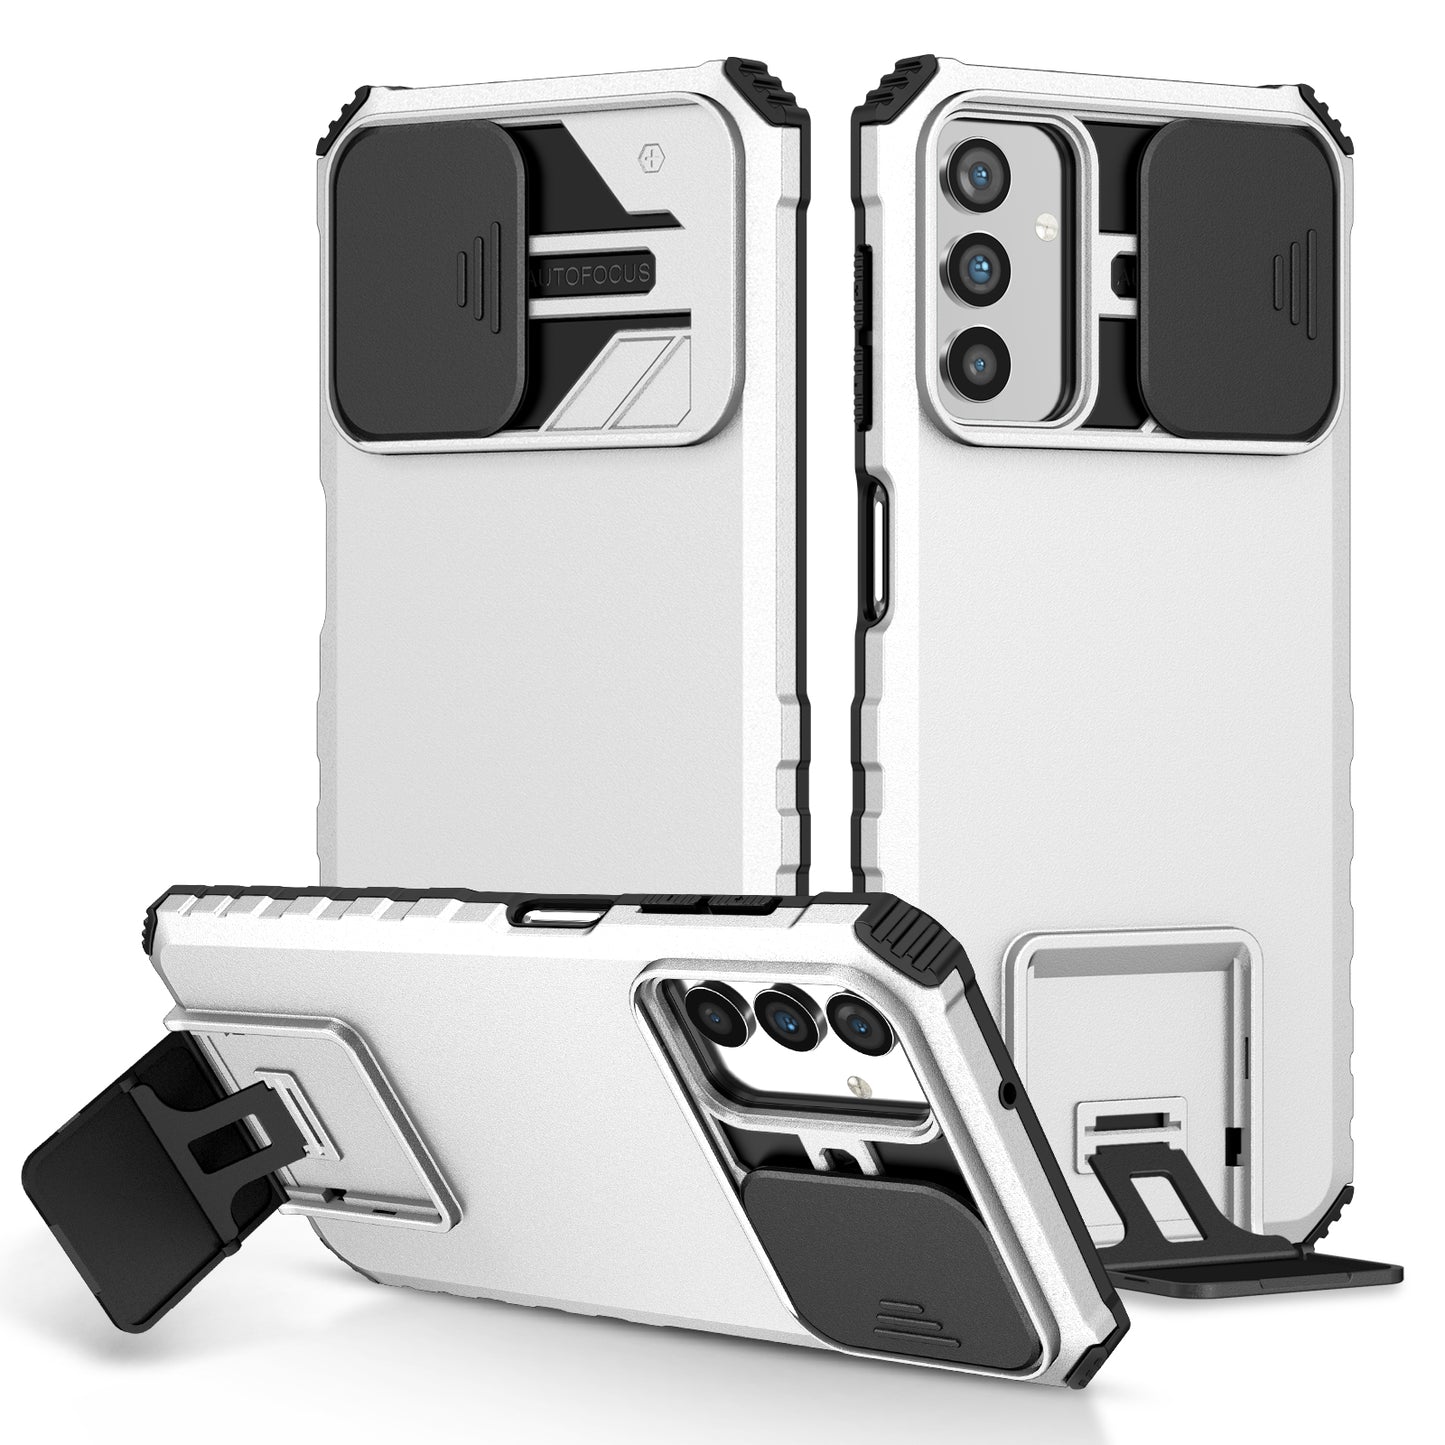 Slide Lens Protection Cover With Folding Kickstand Case, Phone Case